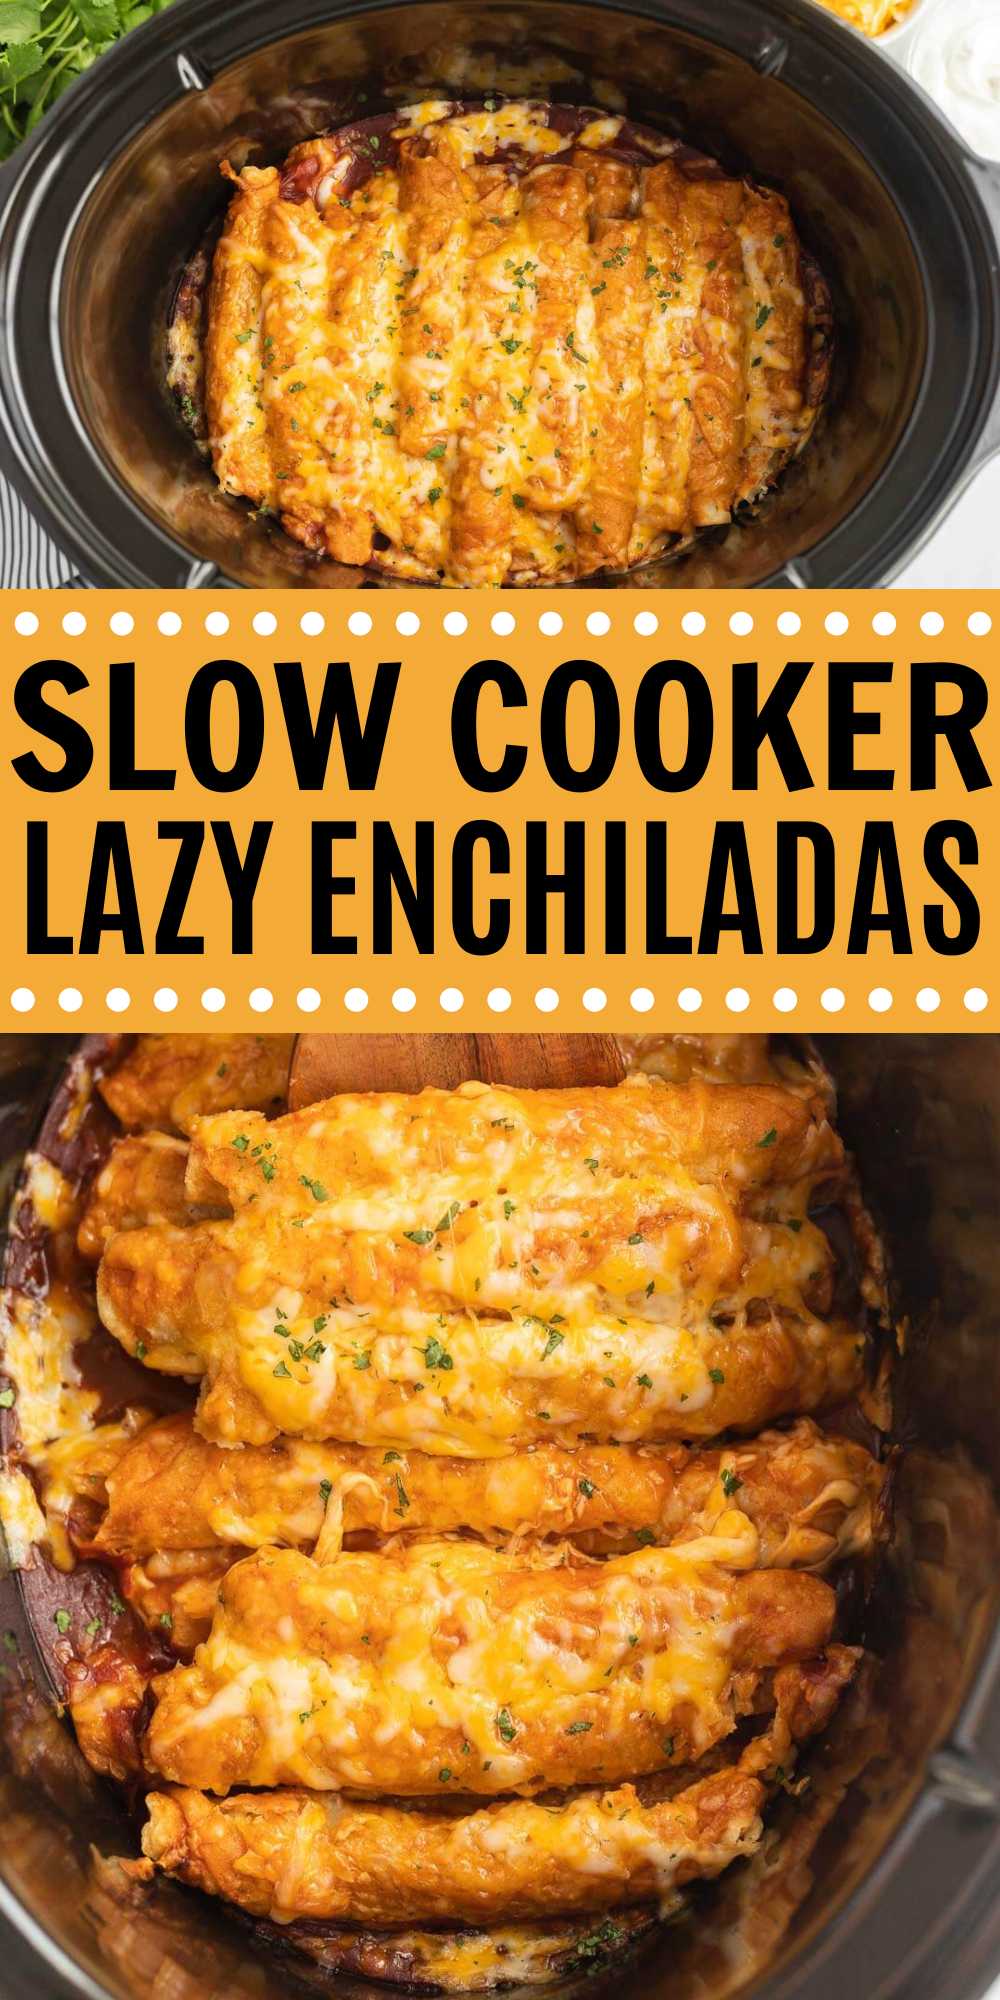 Slow Cooker Lazy Enchiladas (with Tiktok) is easily made with only 3 ingredients. Make dinnertime a breeze with this easy enchilada recipe. This recipe would be perfect for game day or when your kids have friends over. If you like enchiladas then this is the perfect recipe to make. Add a side salad with chips and salsa for a complete meal idea. #eatingonadime #lazyenchiladas #slowcookerenchiladas #tiktokenchiladas #tiktokrecipes